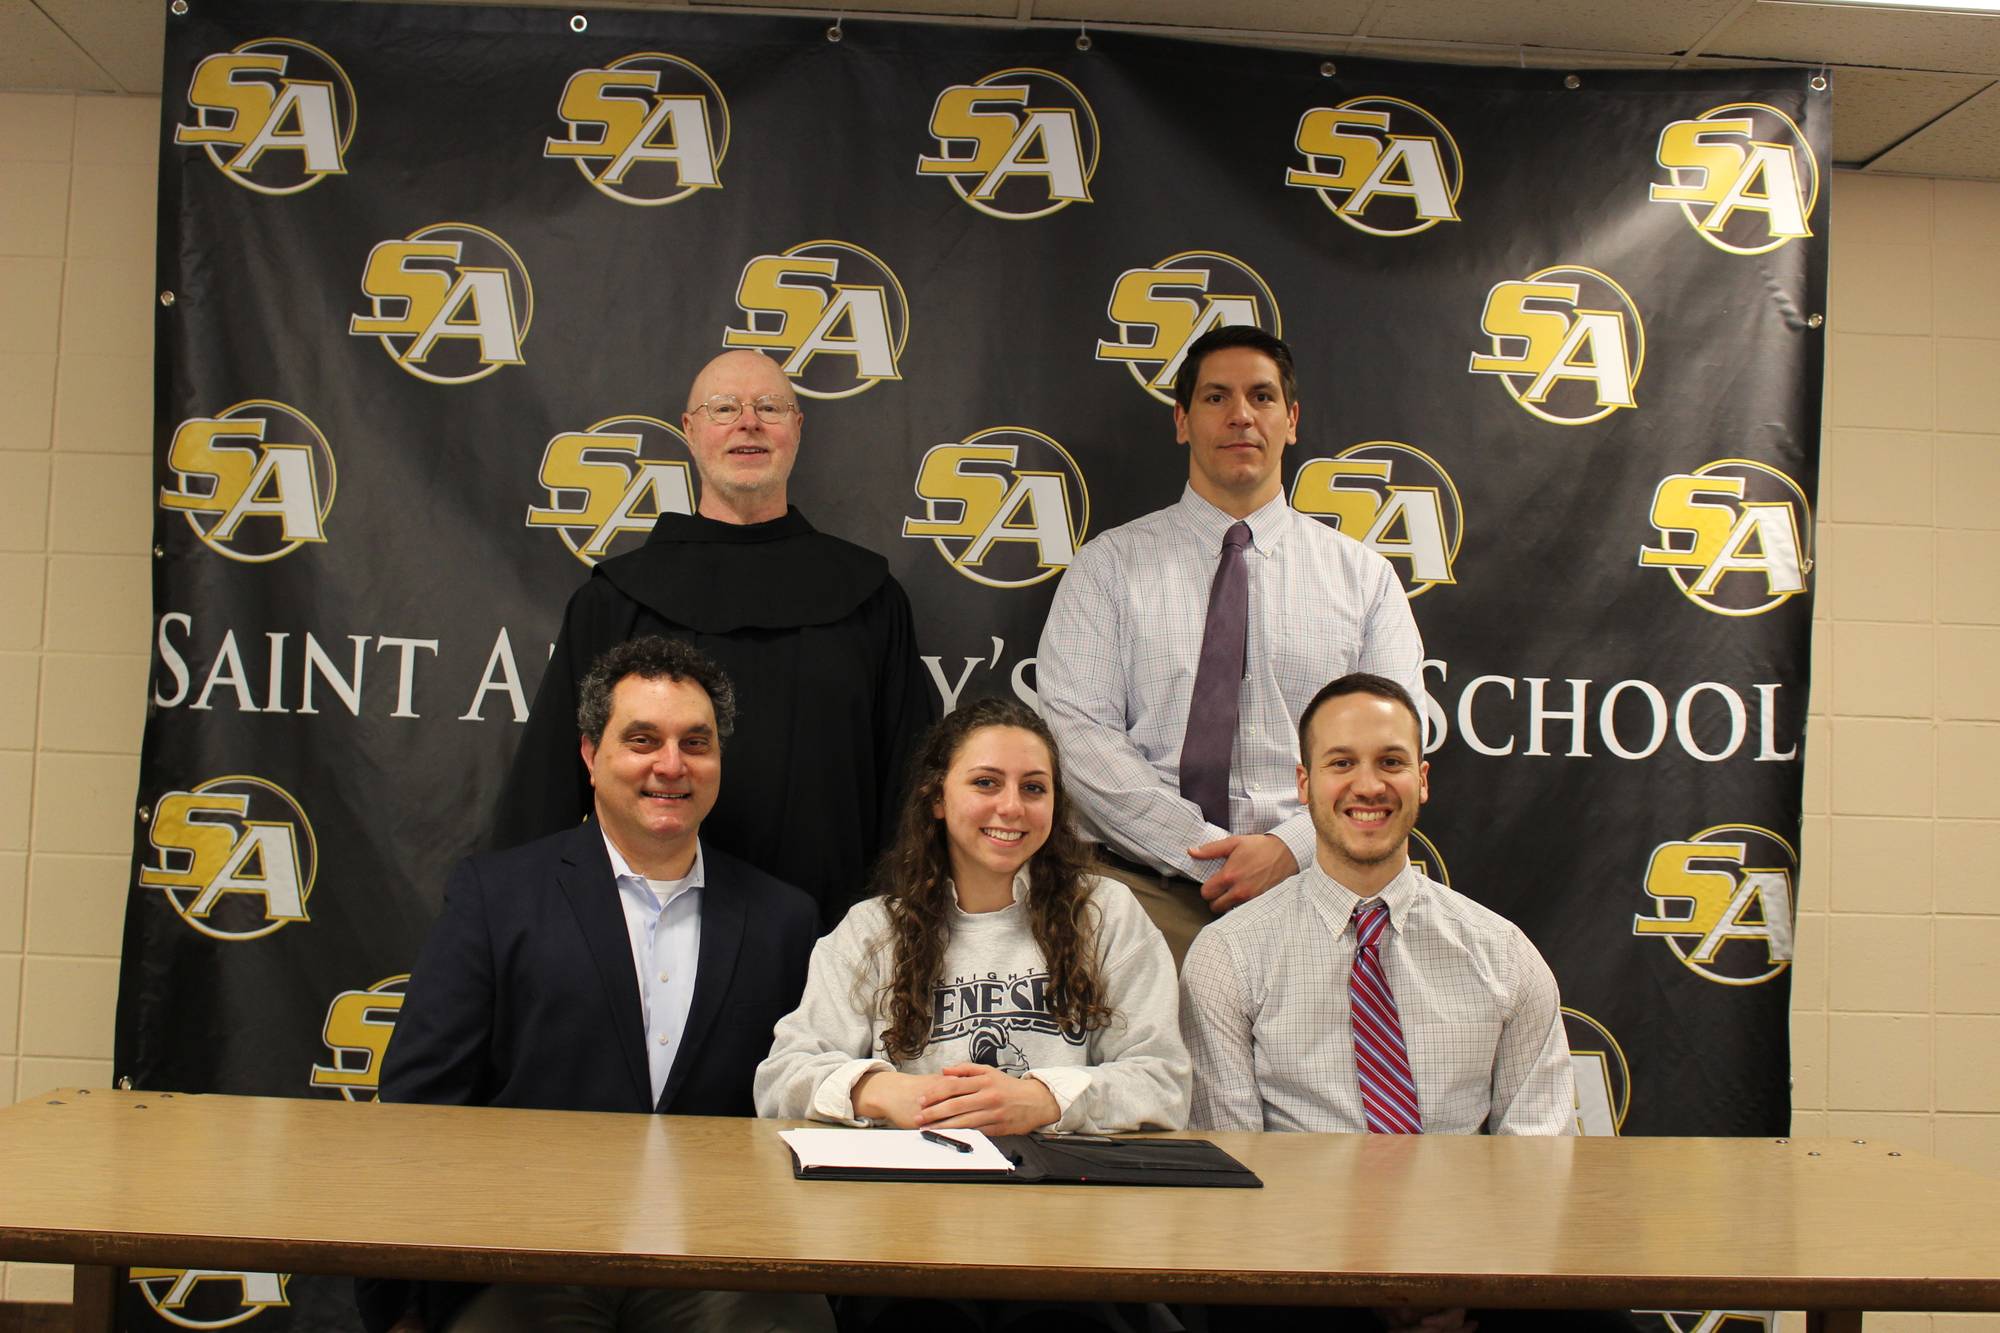 Congratulations Mary Saladino; committed to SUNY Geneseo to play volleyball